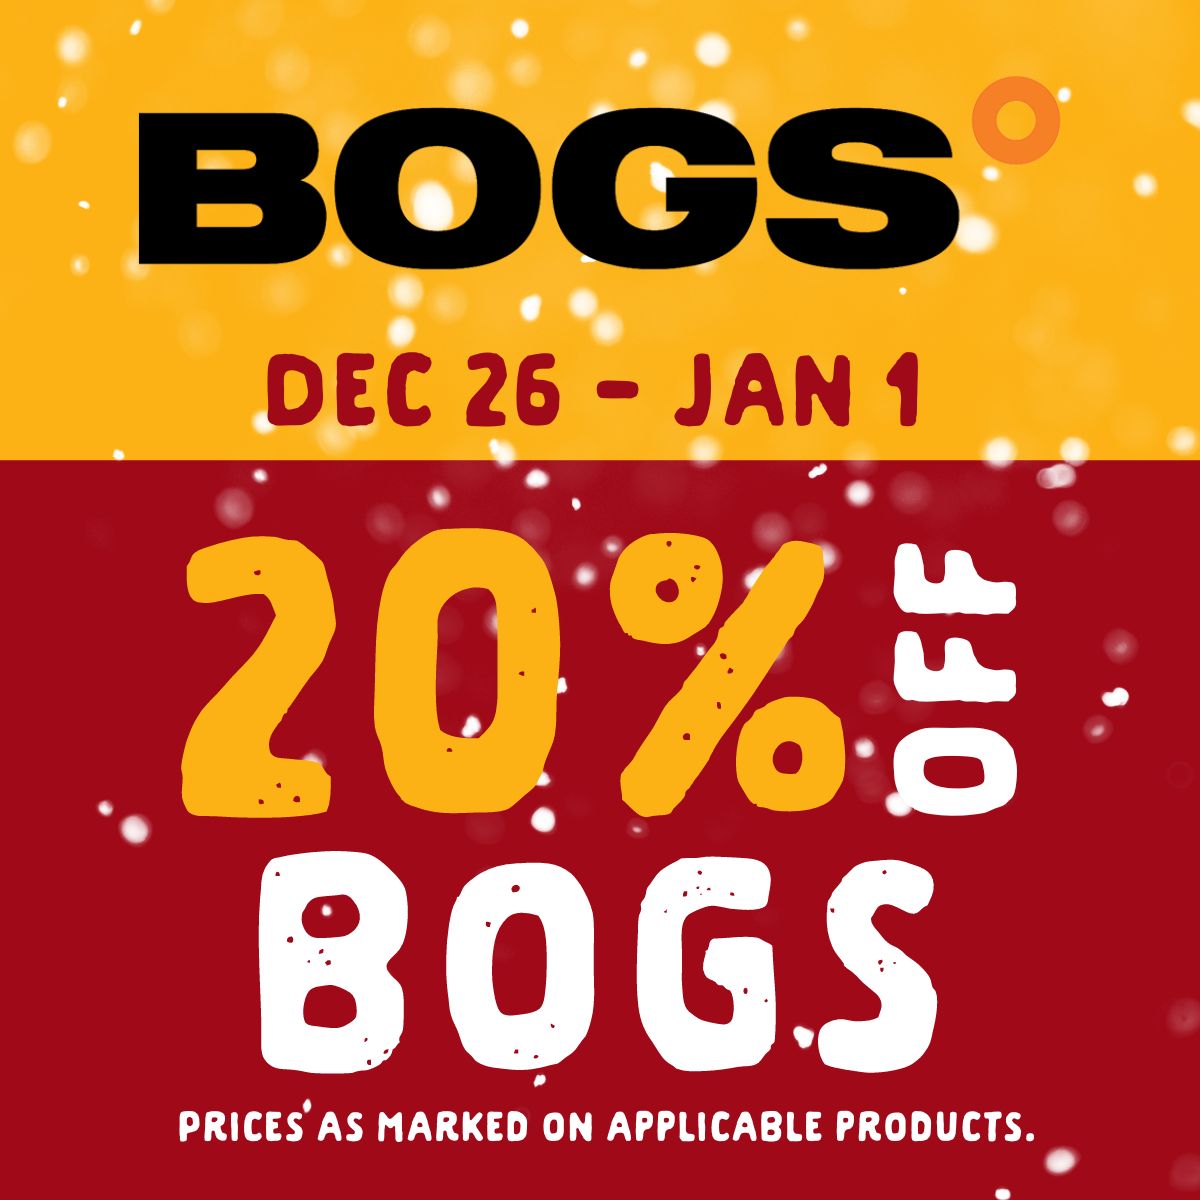 20% off Bogs from December 26 until January 1. Prices as marked on applicable products.